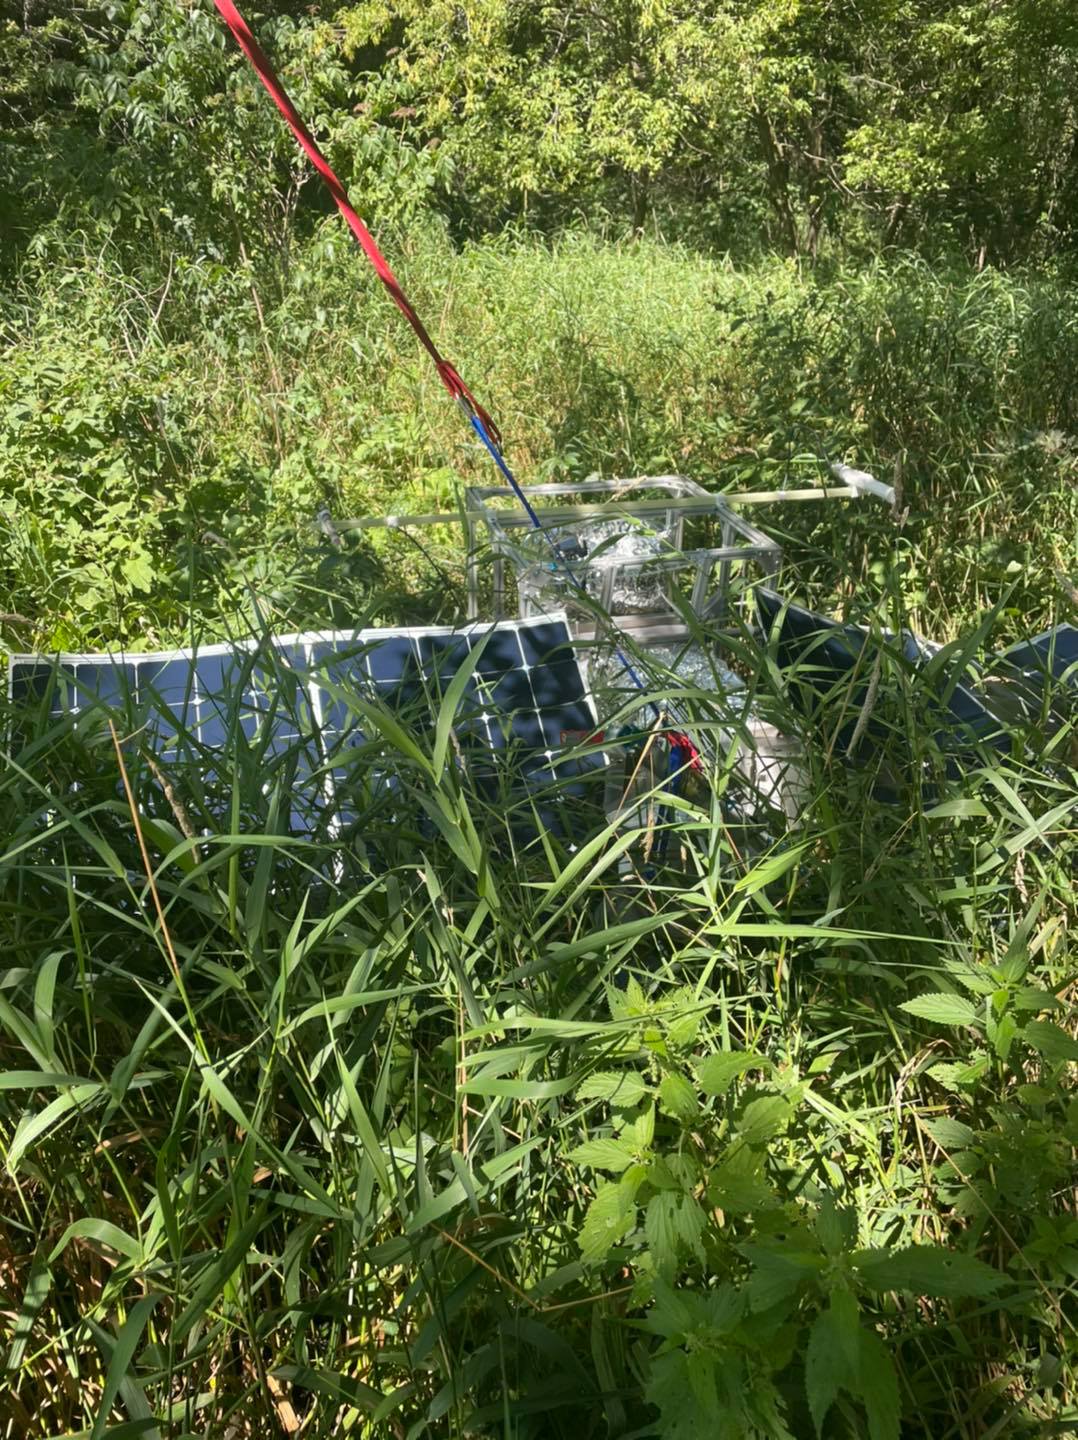 The payload resting in the grass (Picture: Oak Grove Farm Shelters)